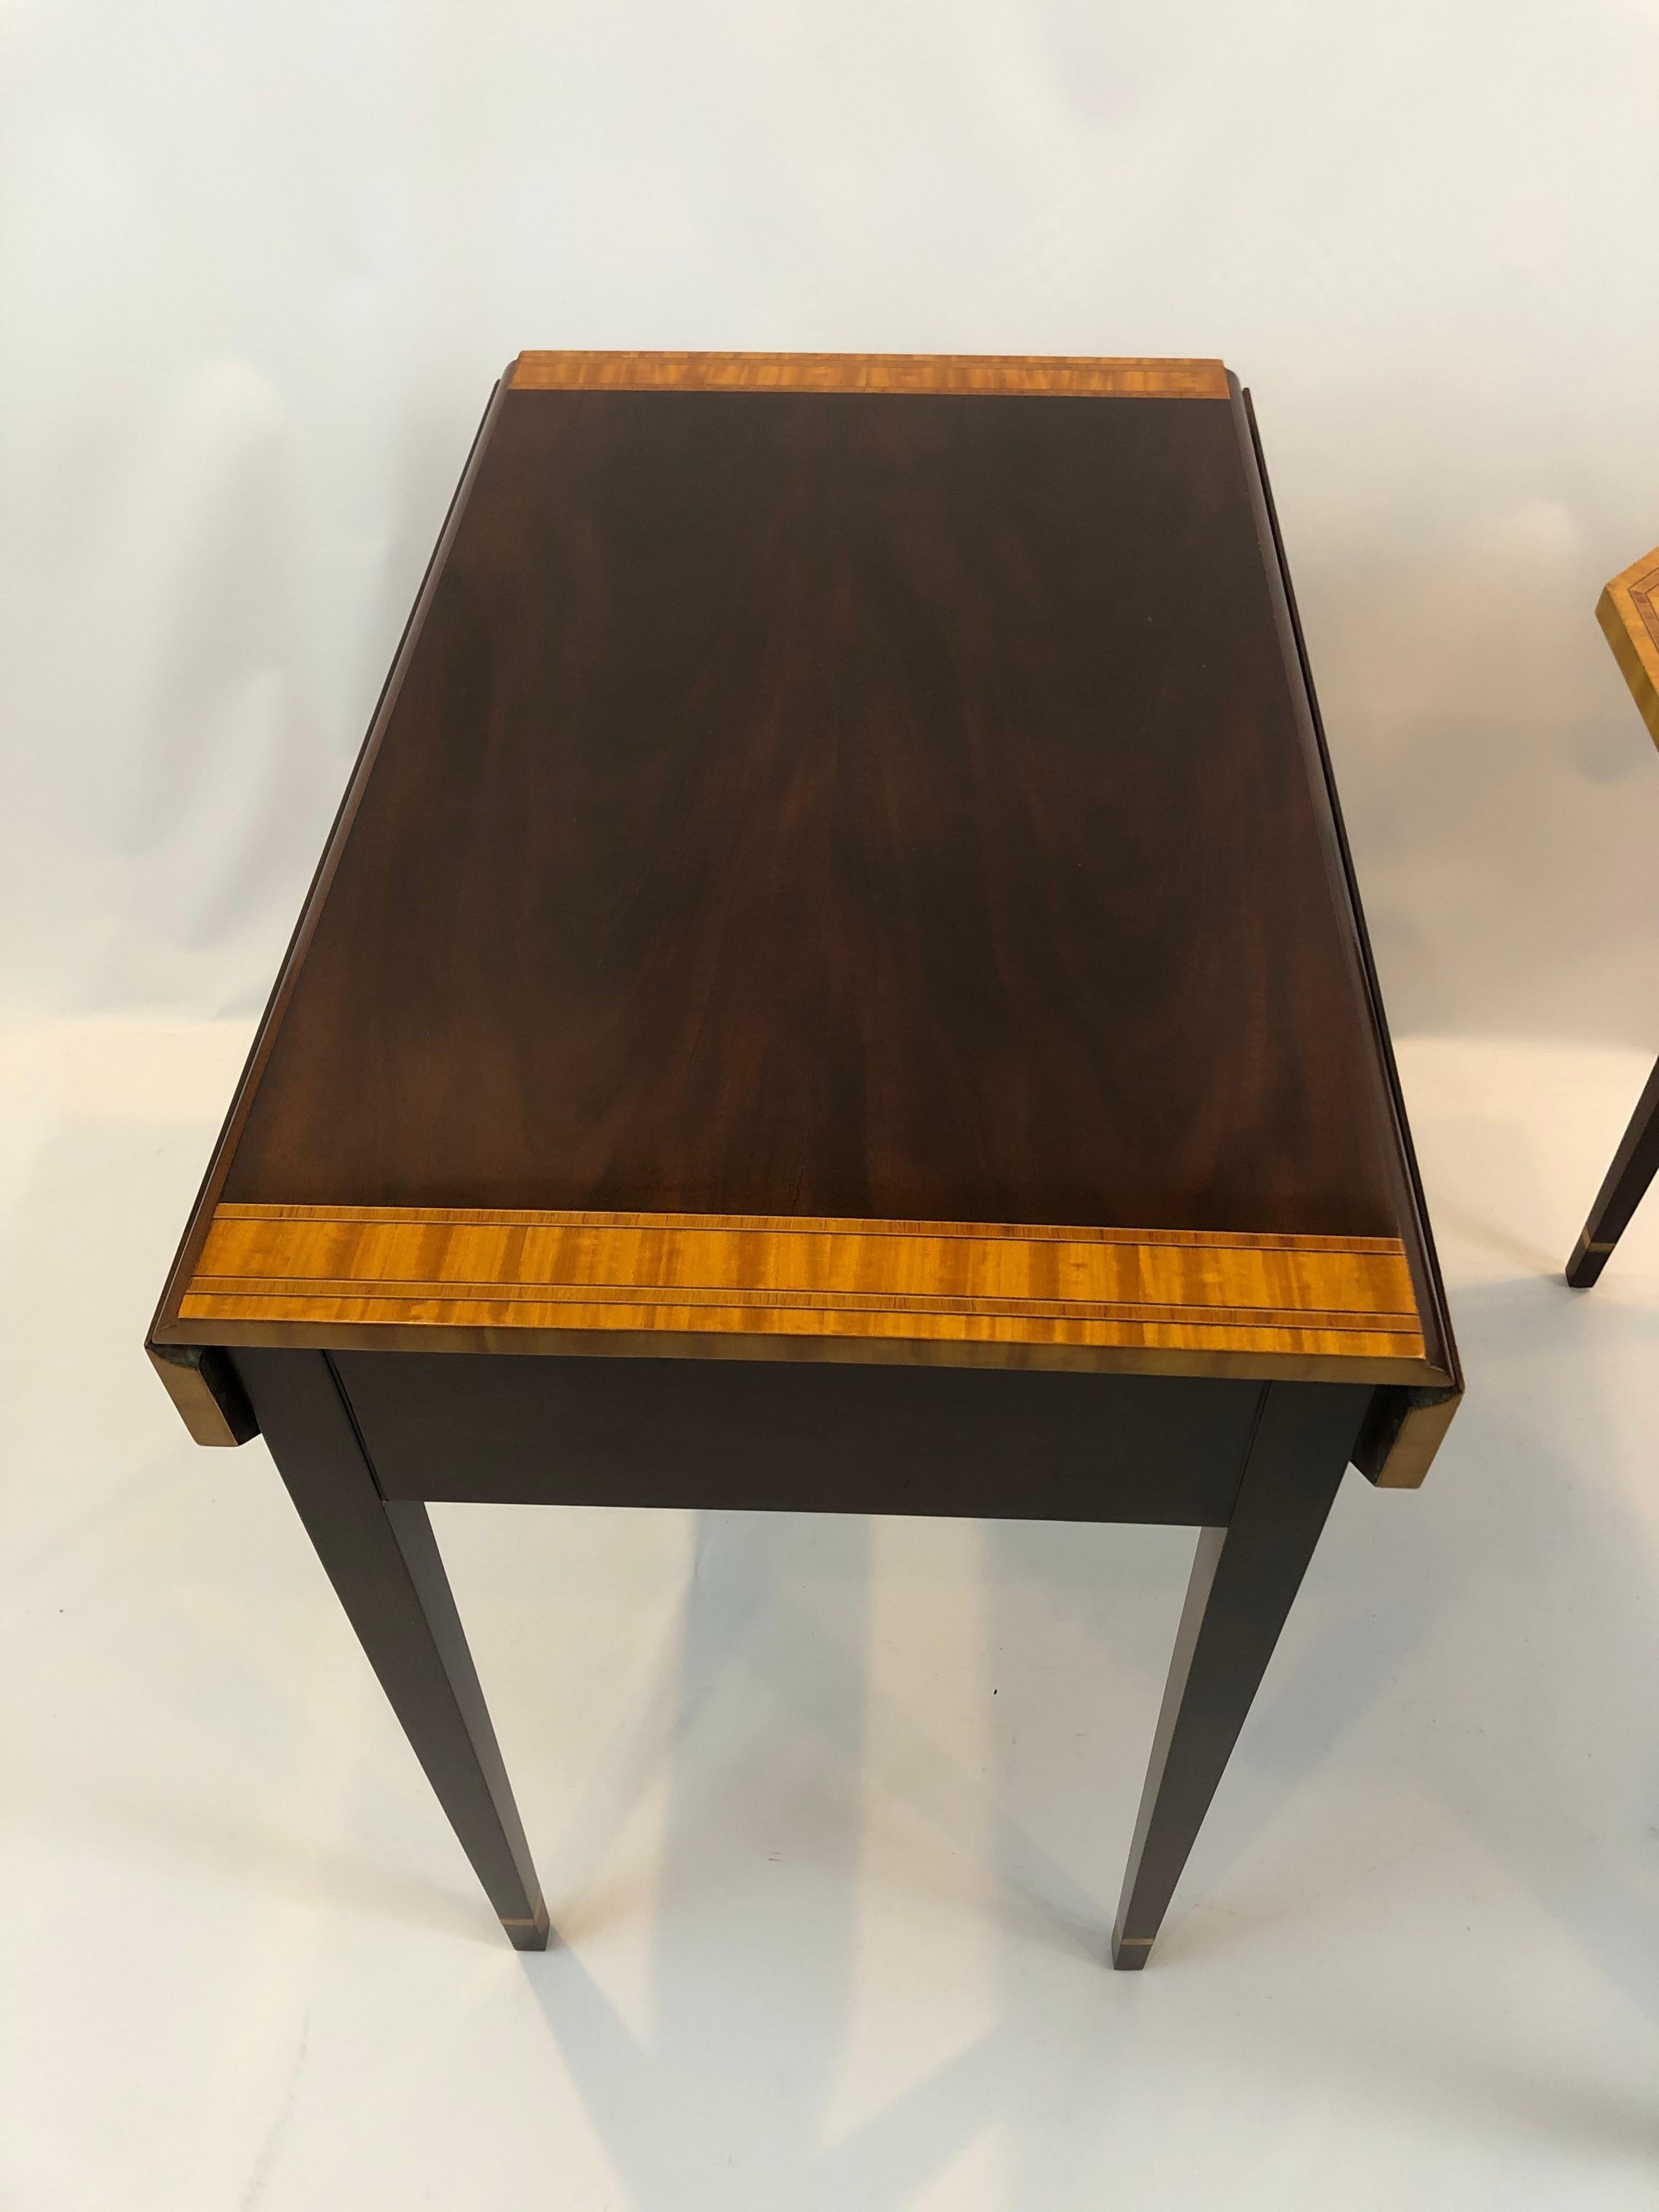 Very elegant classic pair of Pembroke dropleaf mahogany end tables having contrasting satinwood banded inlay around the top, drawers and lovely tapered legs. The bellflower decoration on the legs are Hepplewhite inspired. Single drawers have pretty